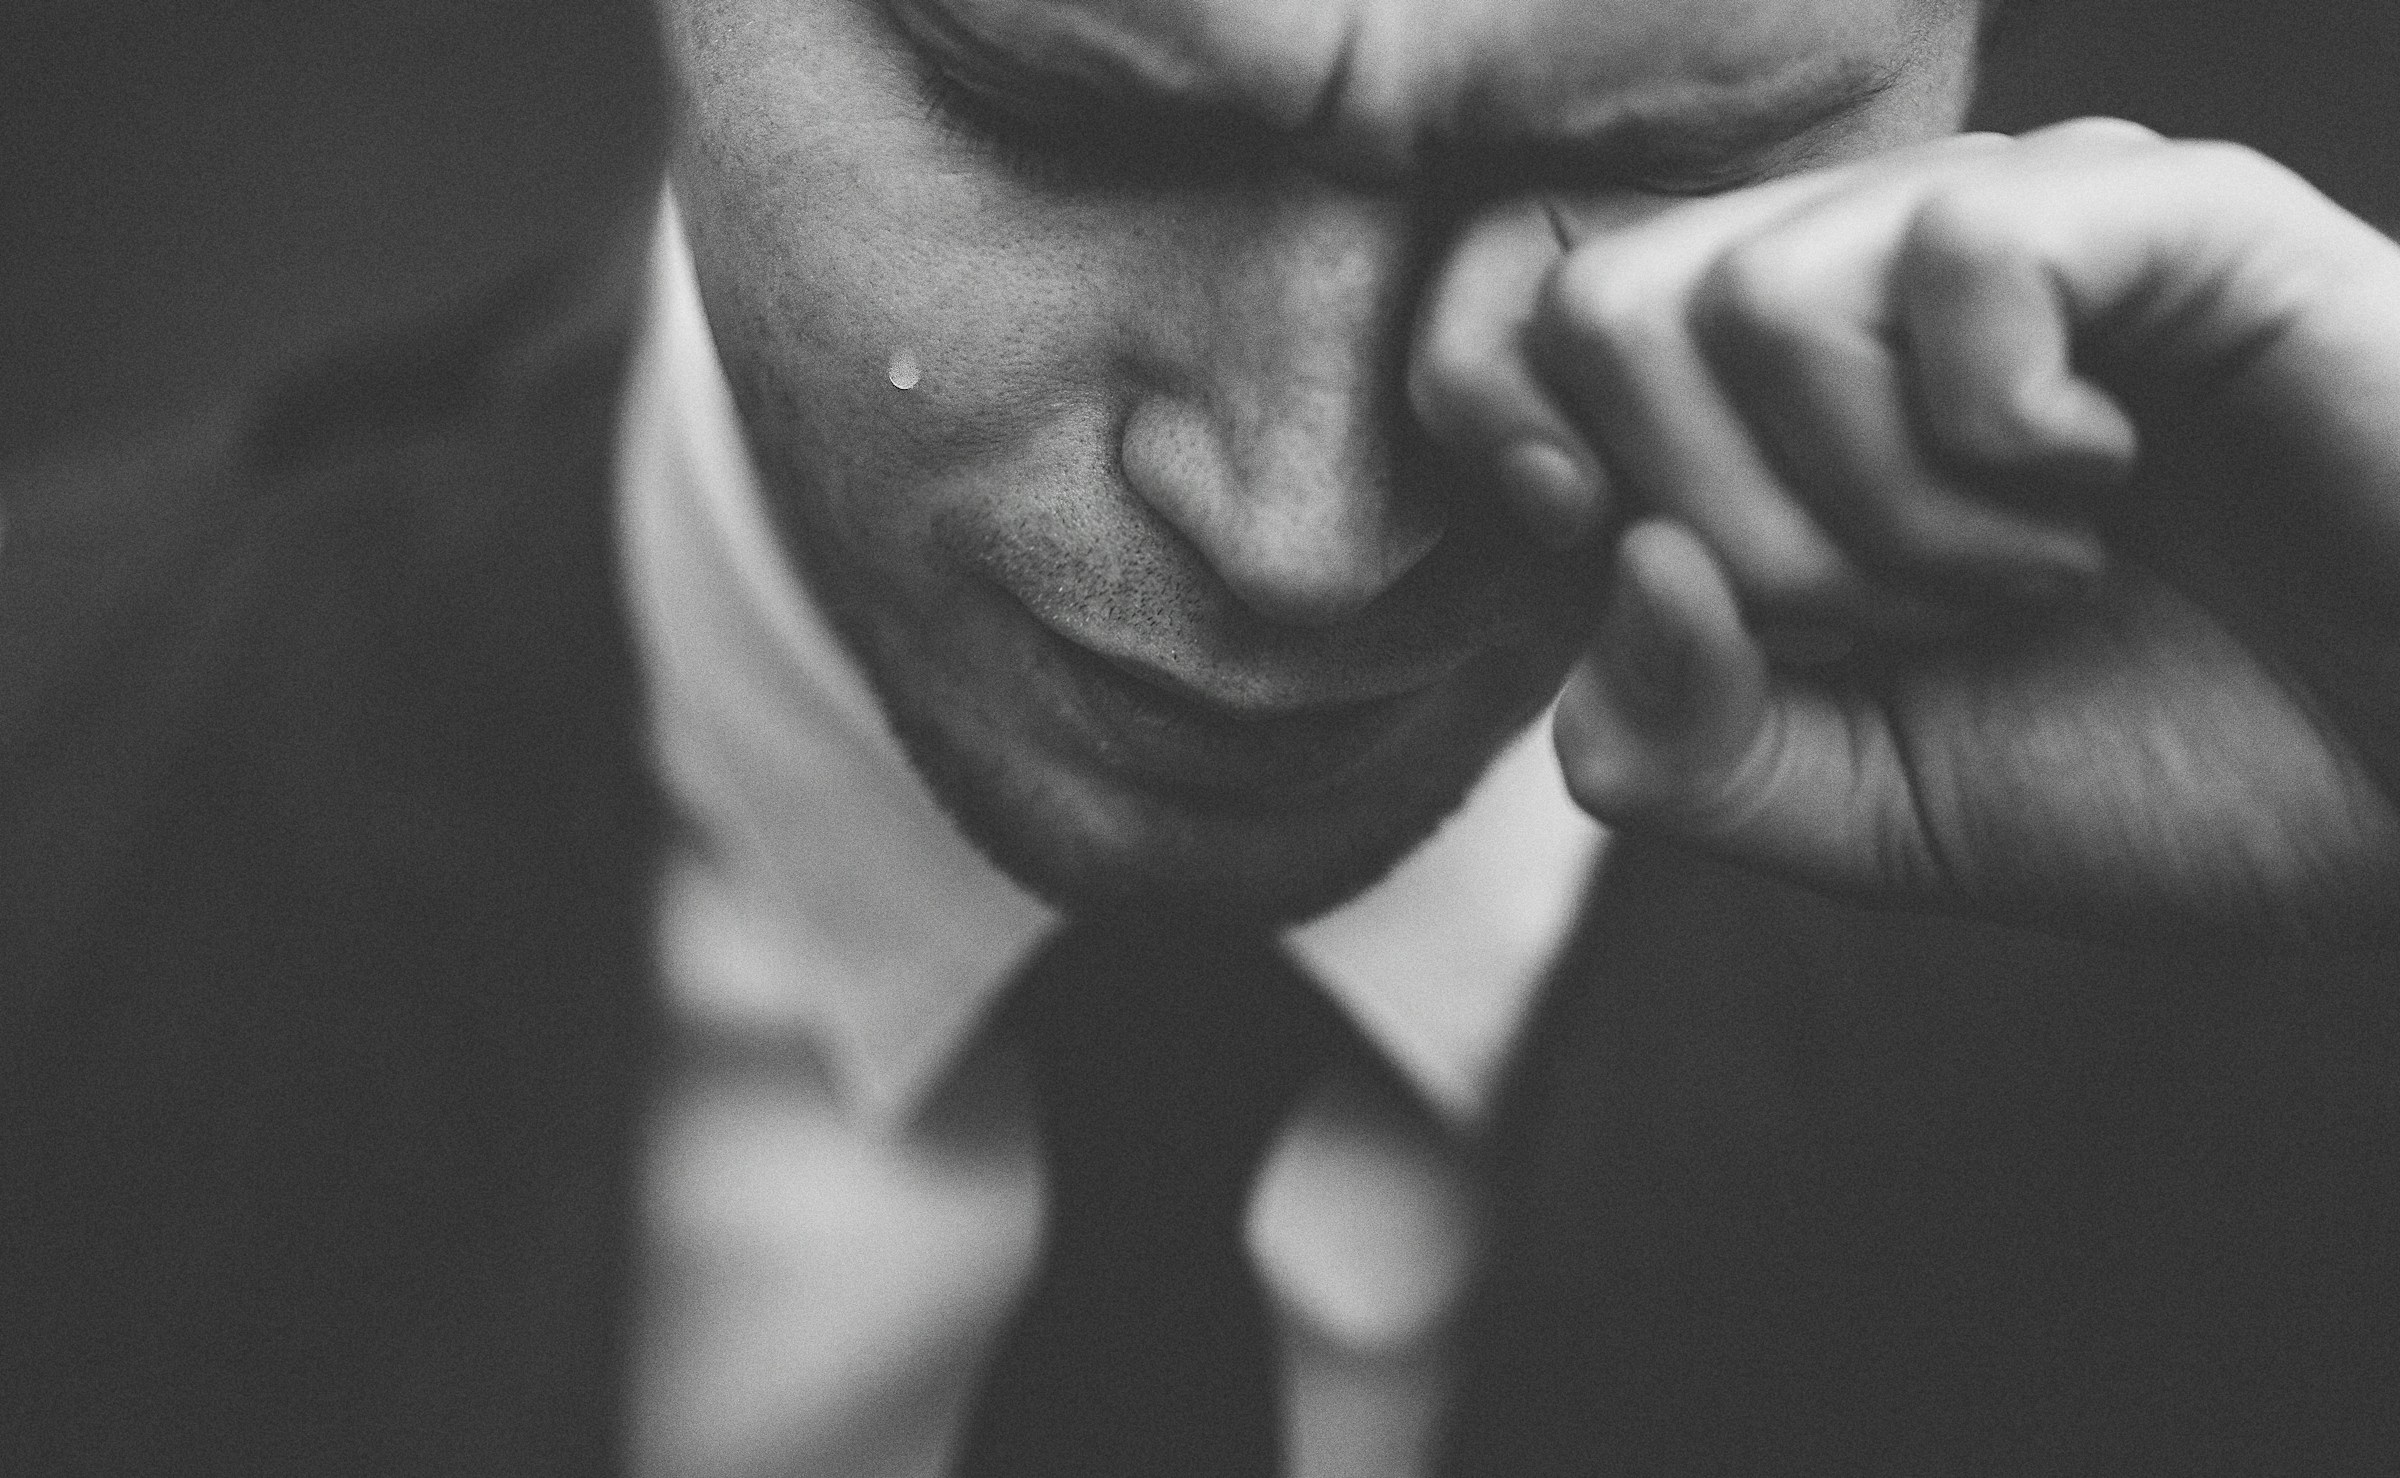 A young guy wiping his tears | Source: Unsplash